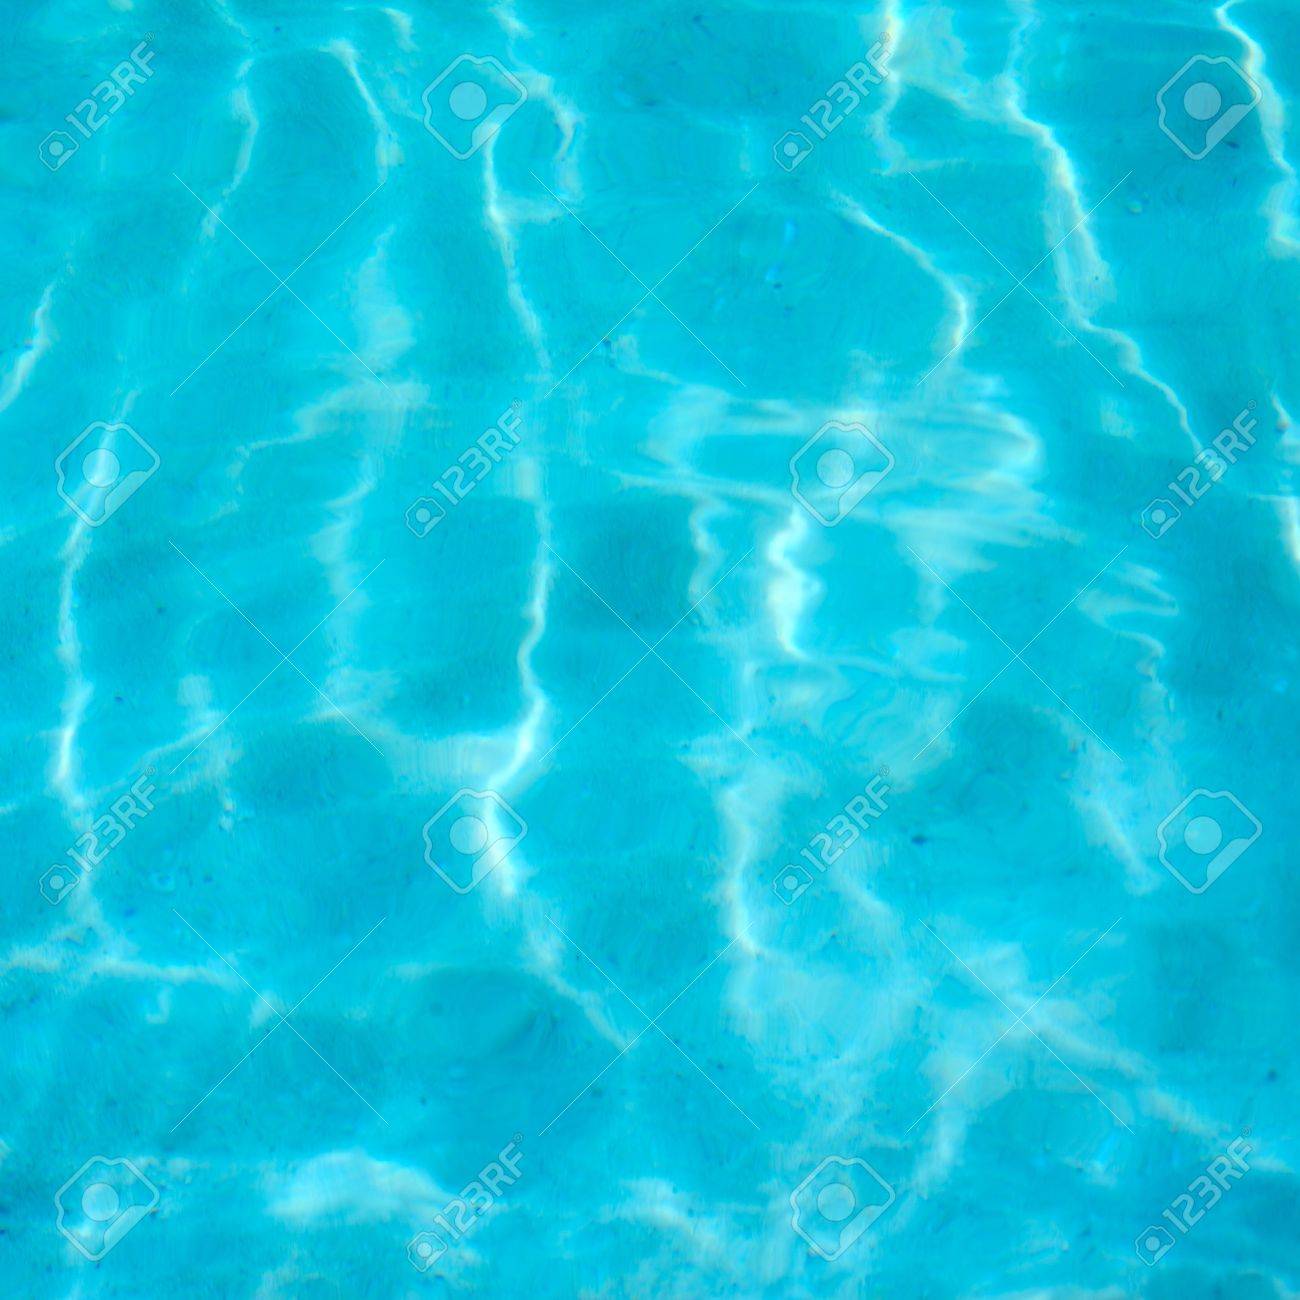 Blue Seabed At Sunny Day Background Soft Focus Stock Photo